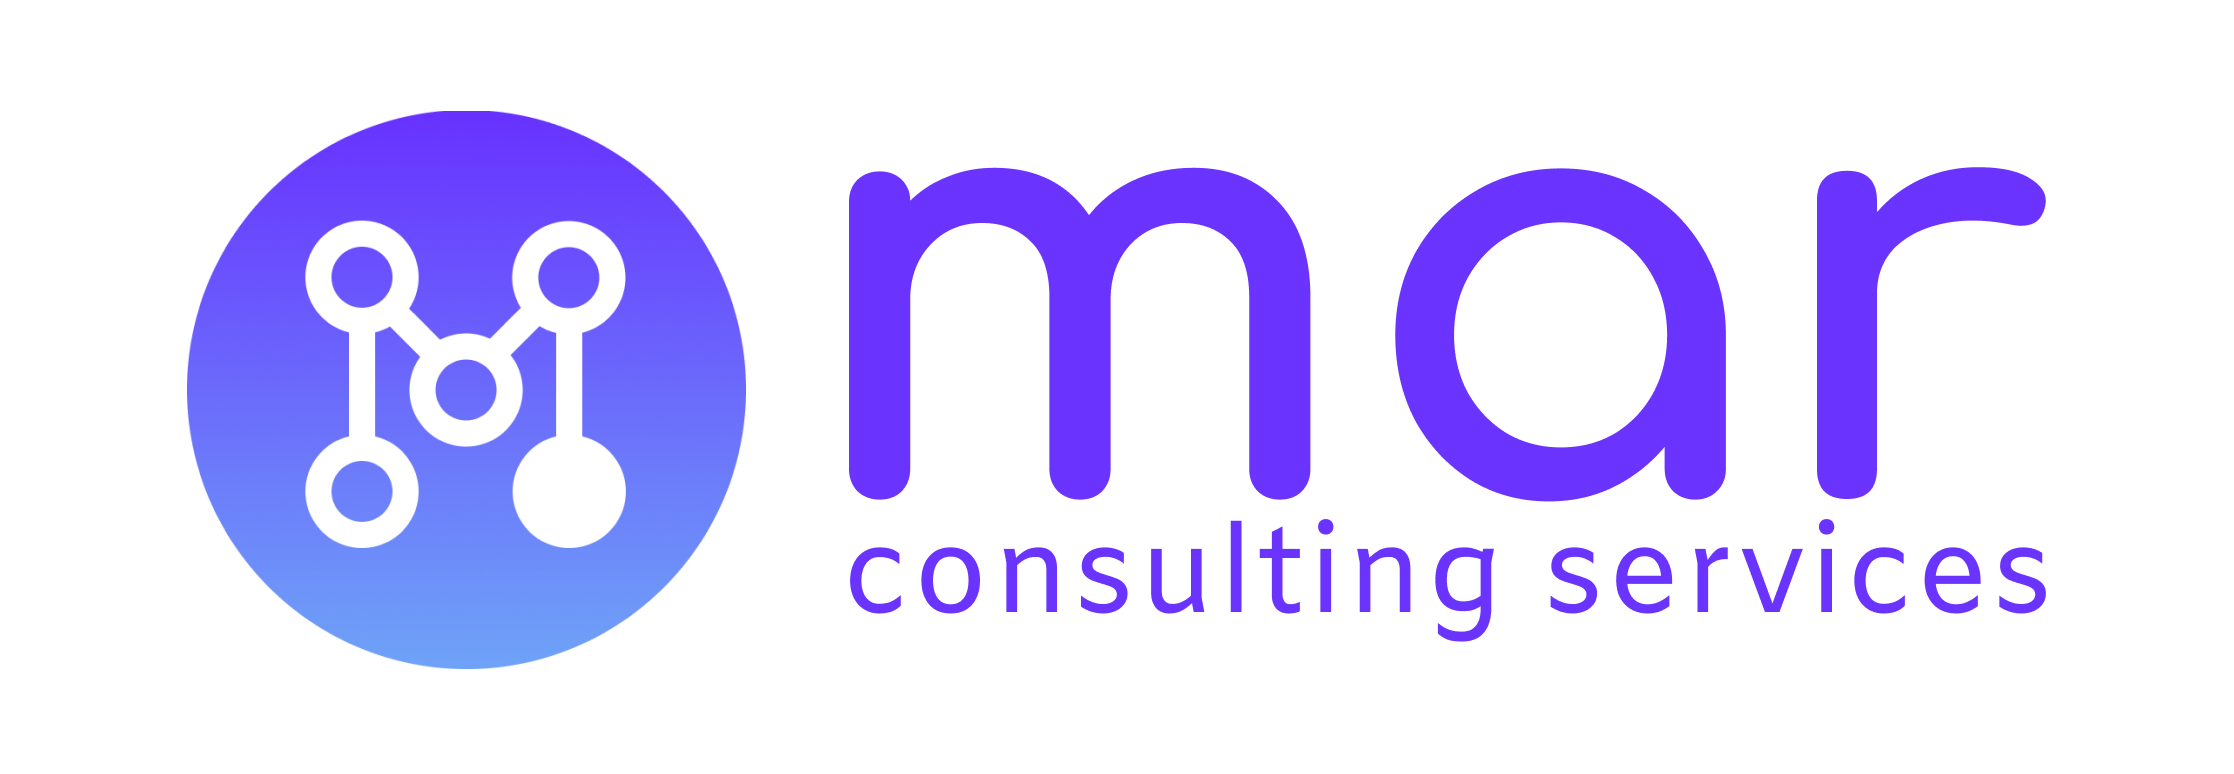 Mar Consulting Services Logo